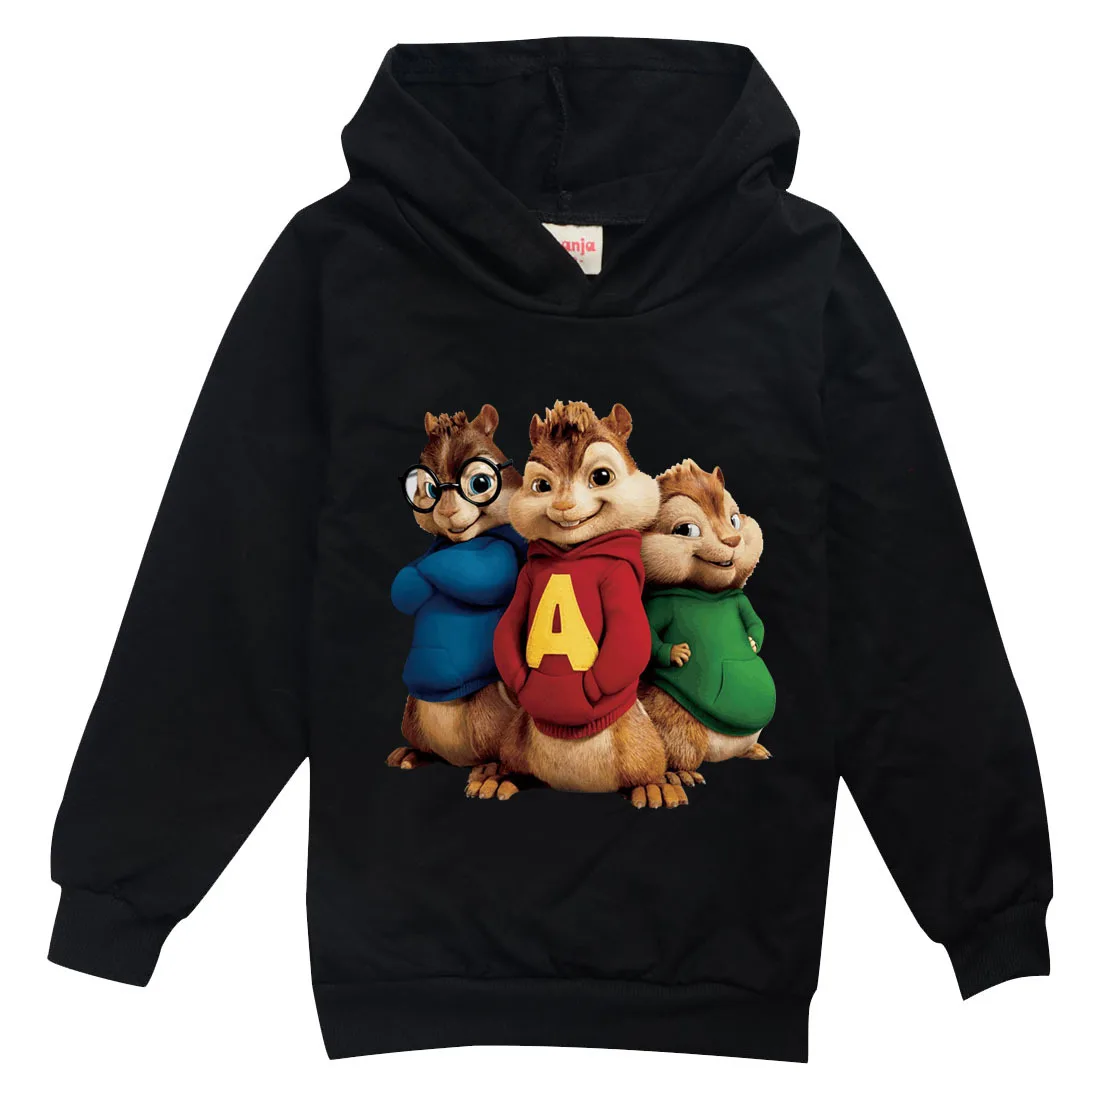 

Alvin and The Chipmunks Wear Spring Autumn Long-sleeved Shirt Baby Boy Tops Boys Graphic Tee Kids Clothes Girls 8 To 12 fall